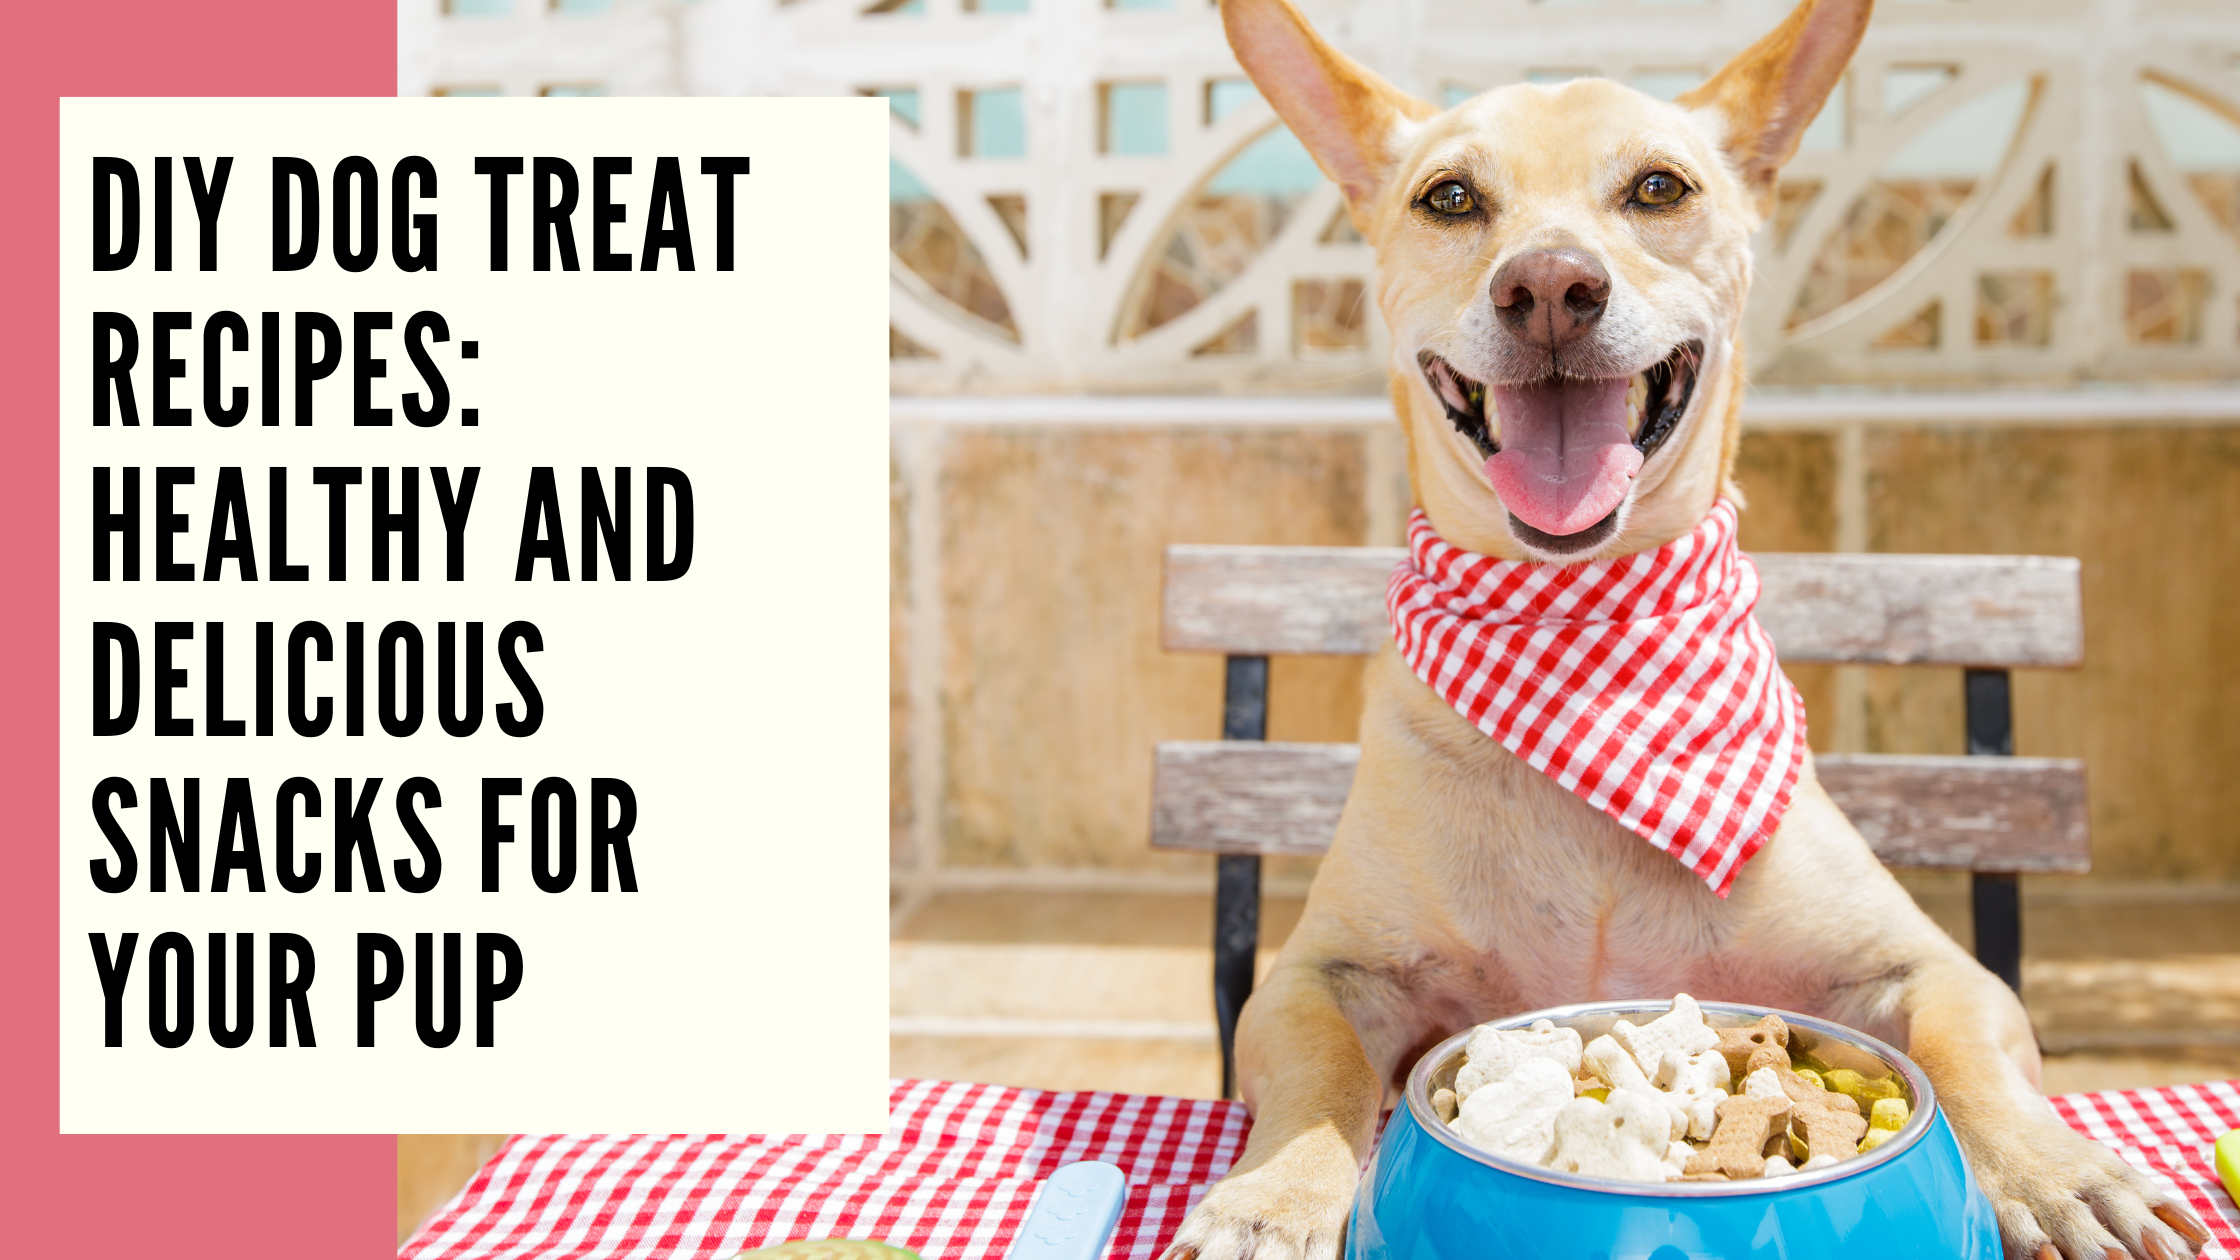 DIY Dog Treat Recipes Healthy and Delicious Snacks for Your Pup